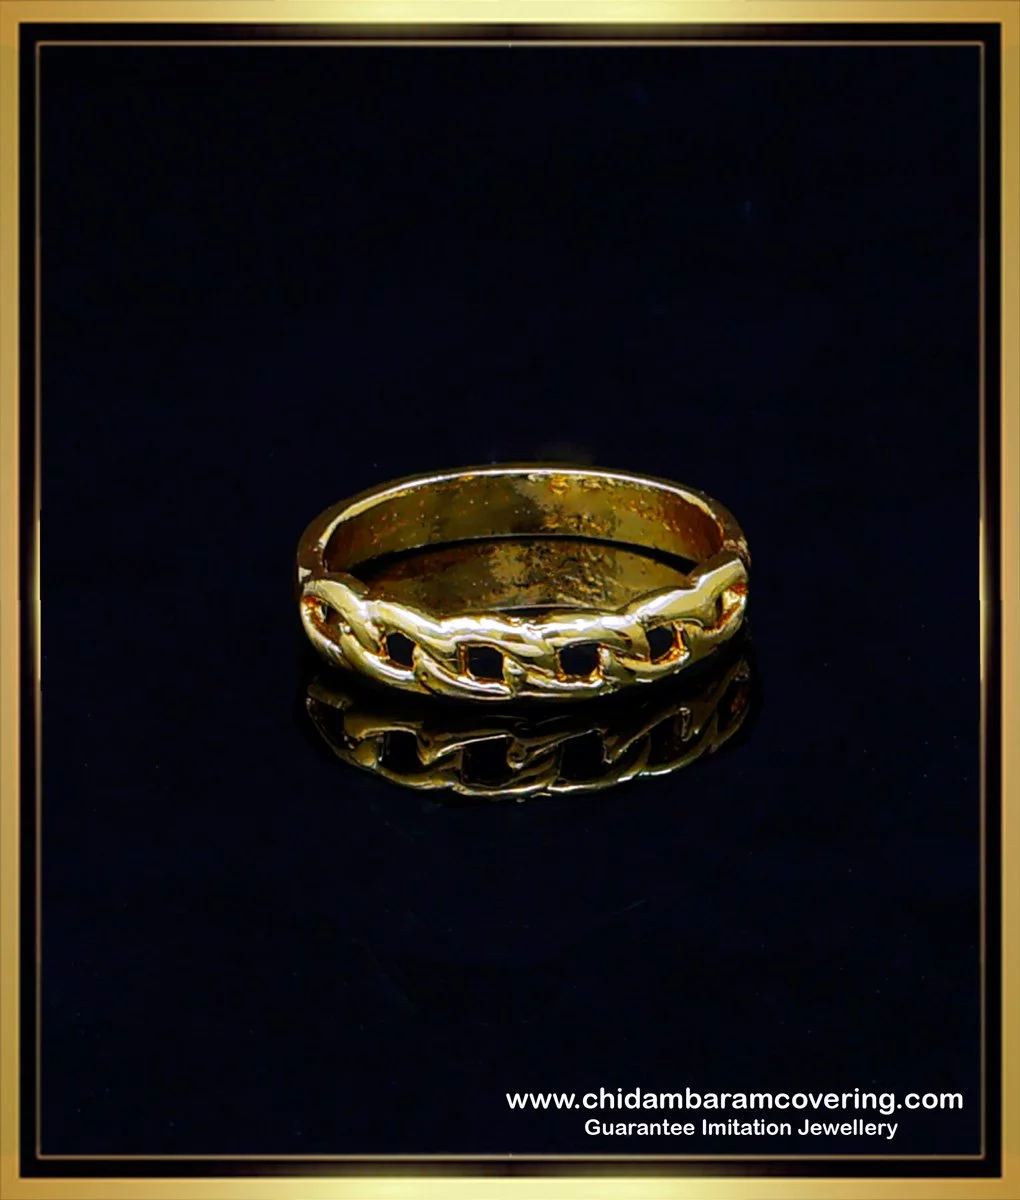 Casting Gold Ring - RK Jewellers